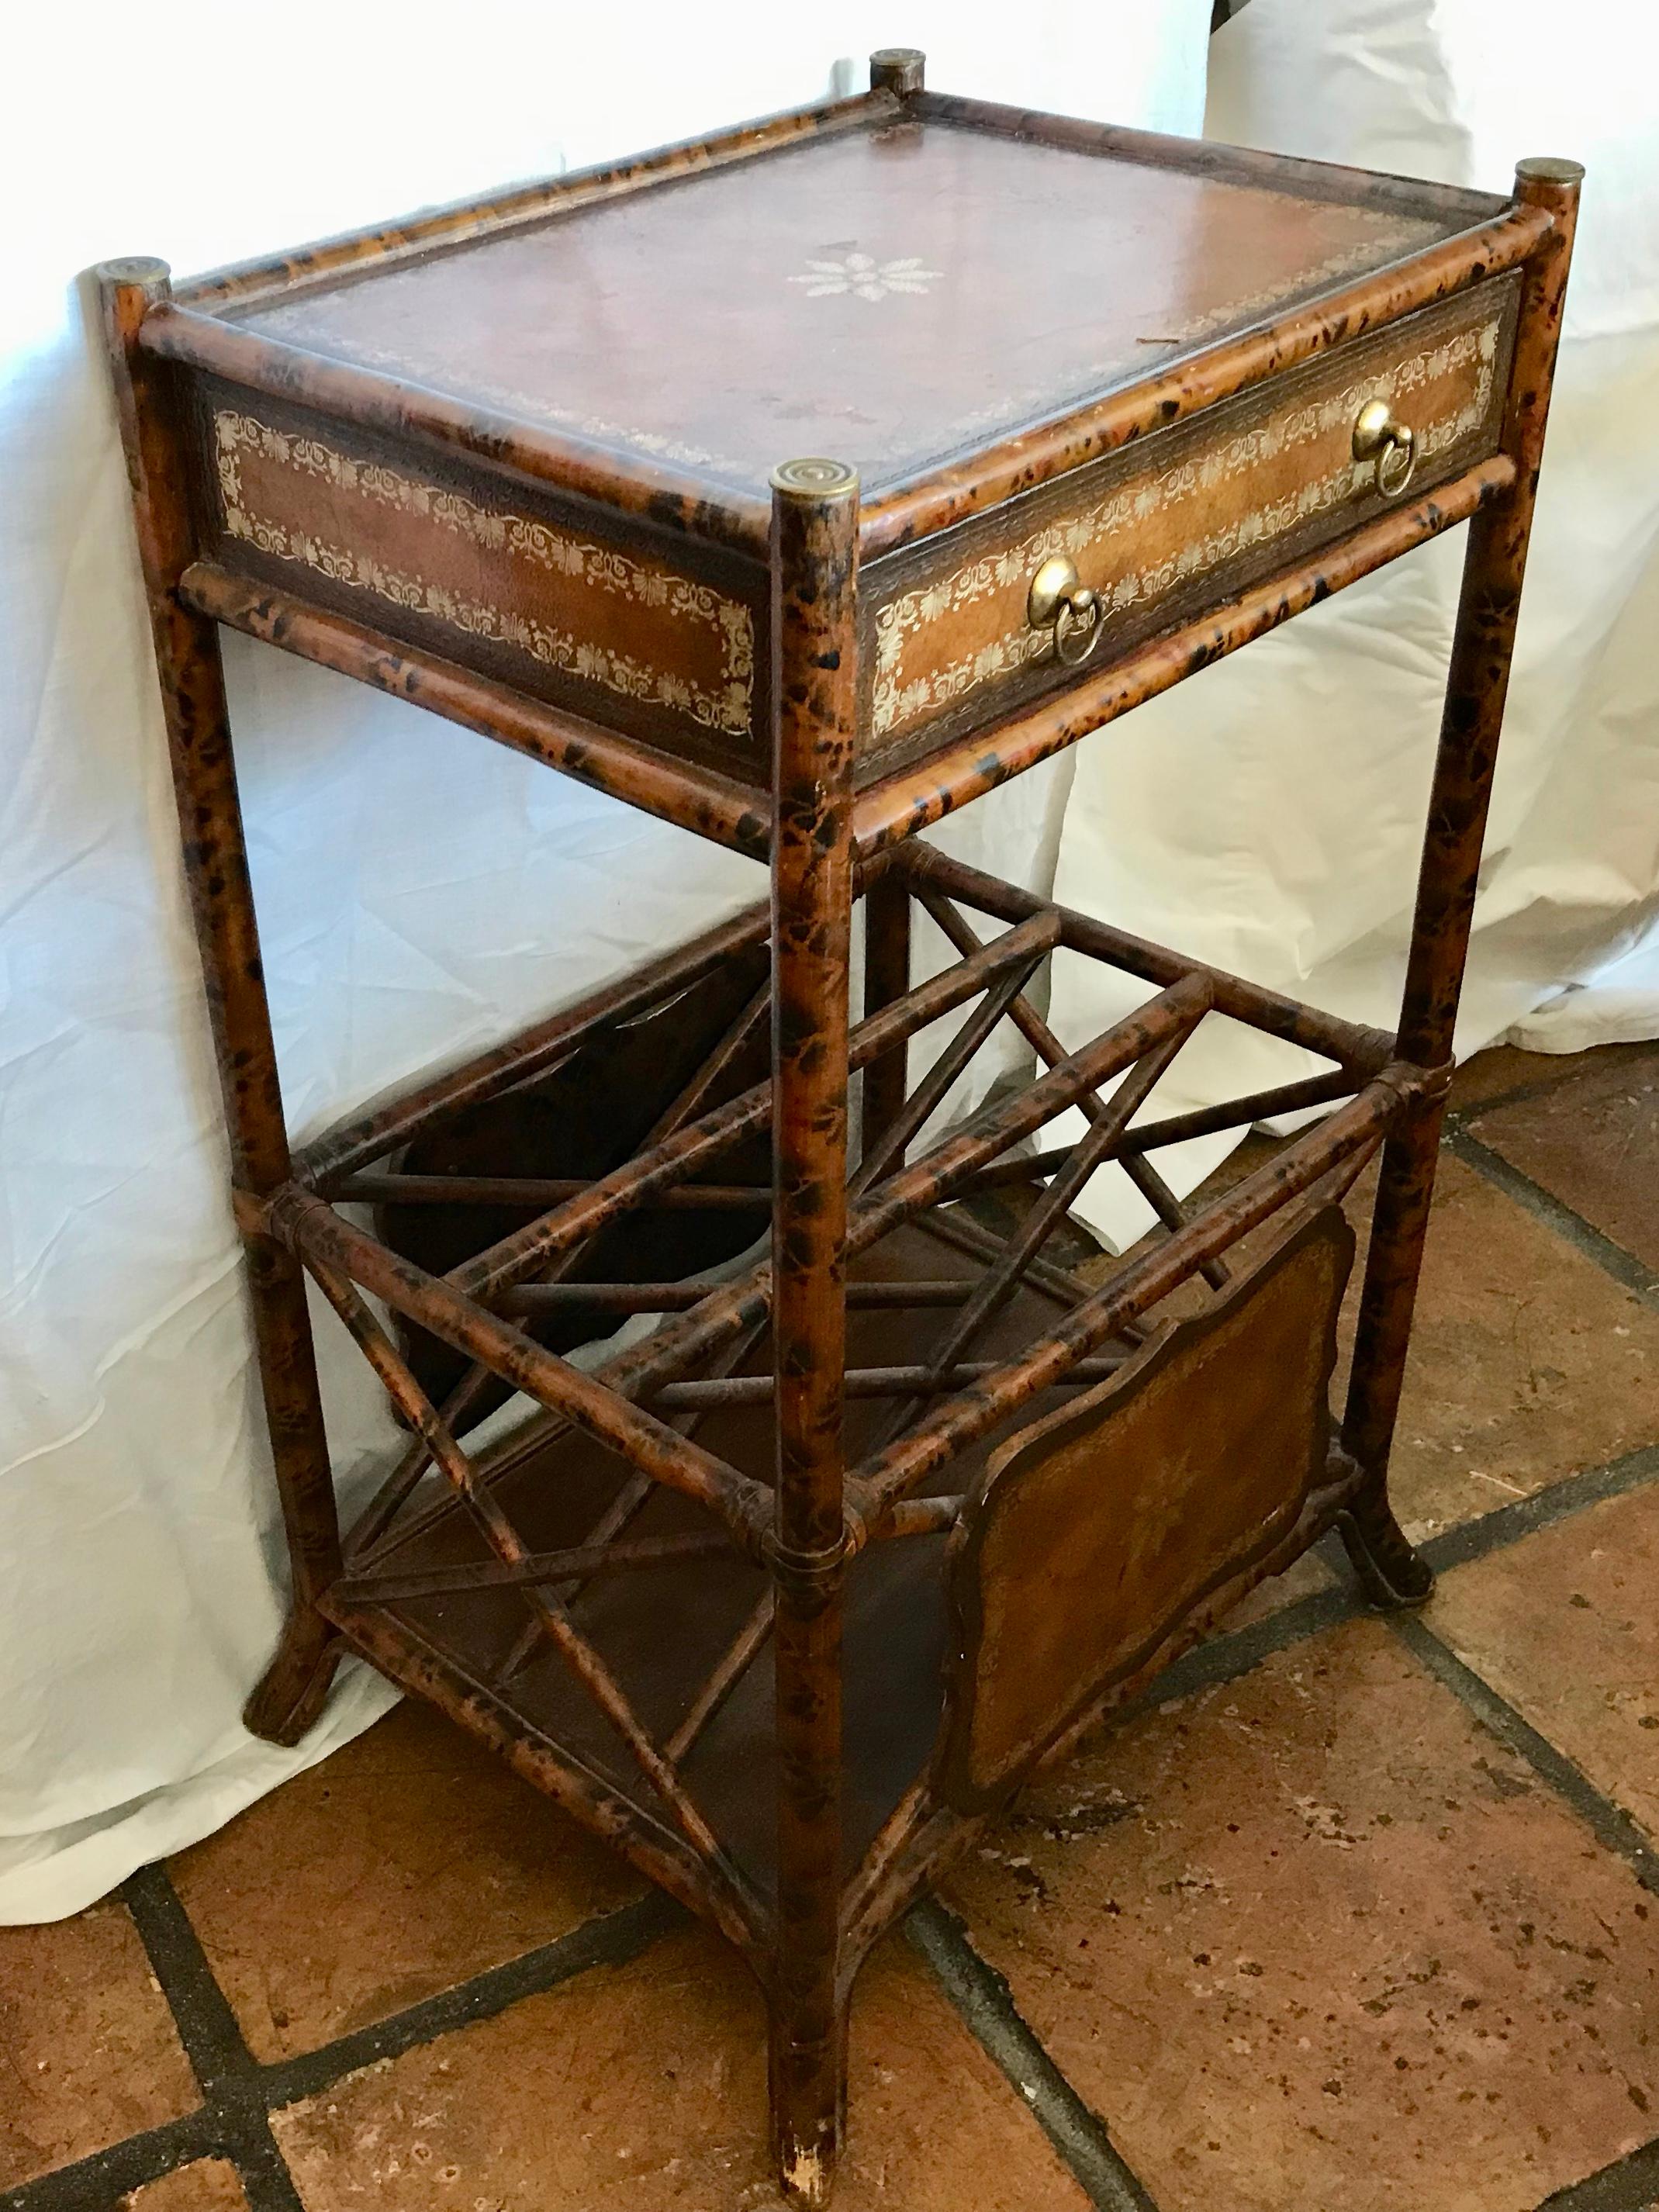 Fashioned with a single drawer and a magazine stand base. It is finished
on all four sides, so it can stand freely in a room as a chair side table. or, 
conversely, be used as a utilitarian night stand. It is smartly finished with
a leather top